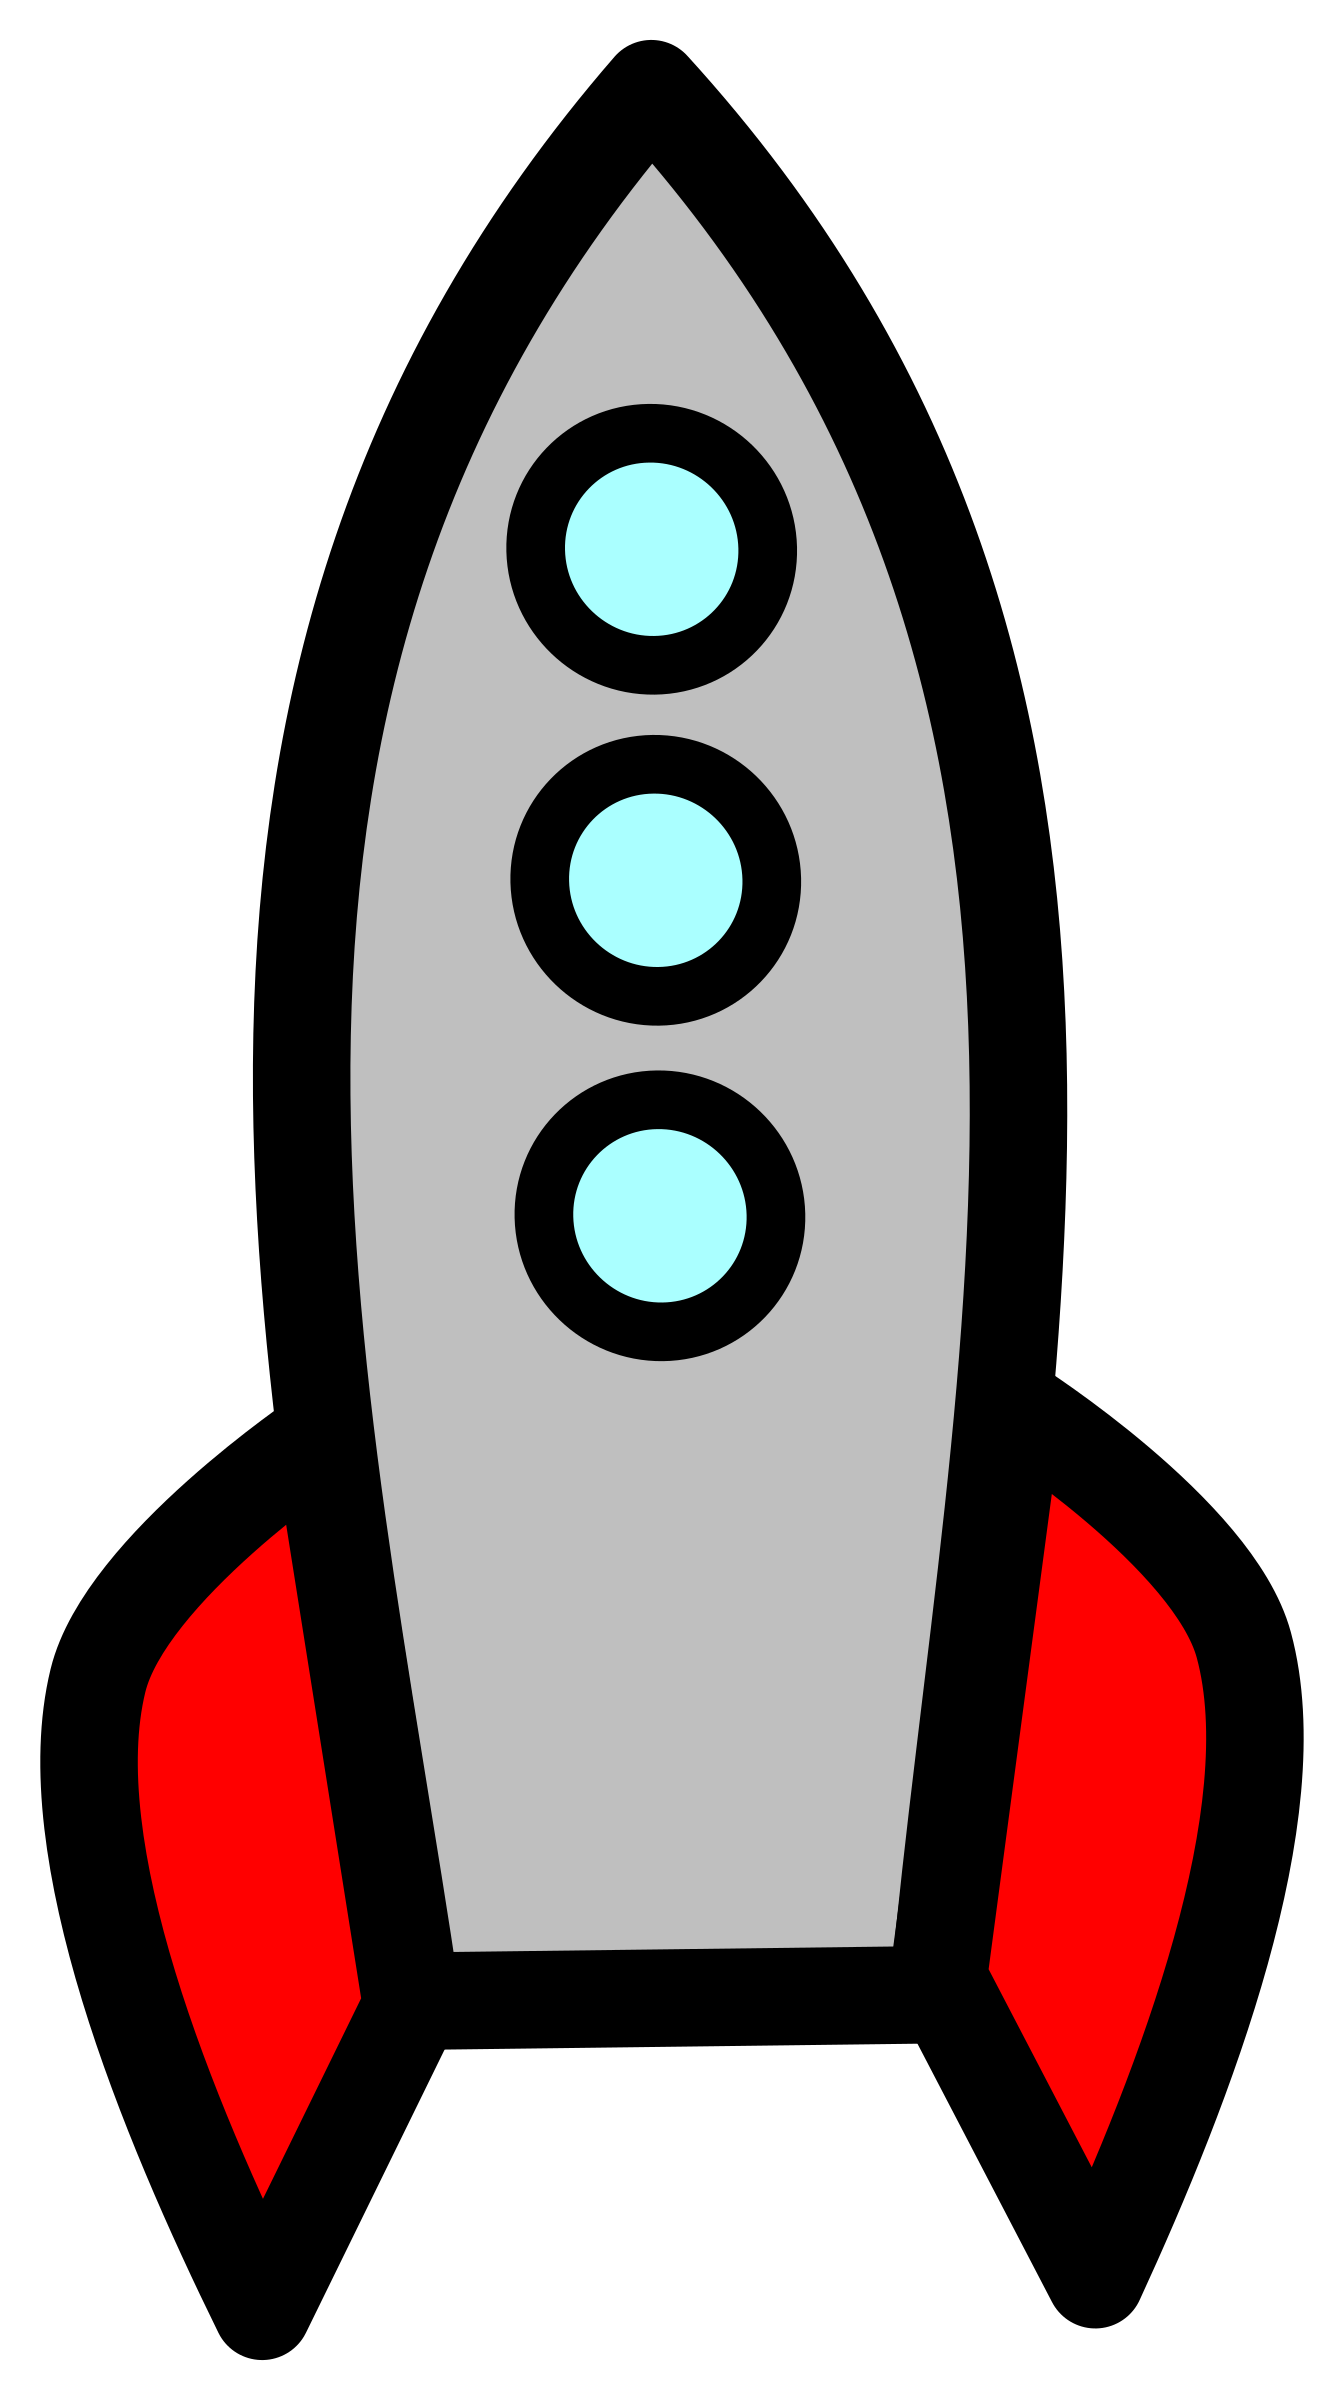 Planets clipart rocket. Line art at getdrawings